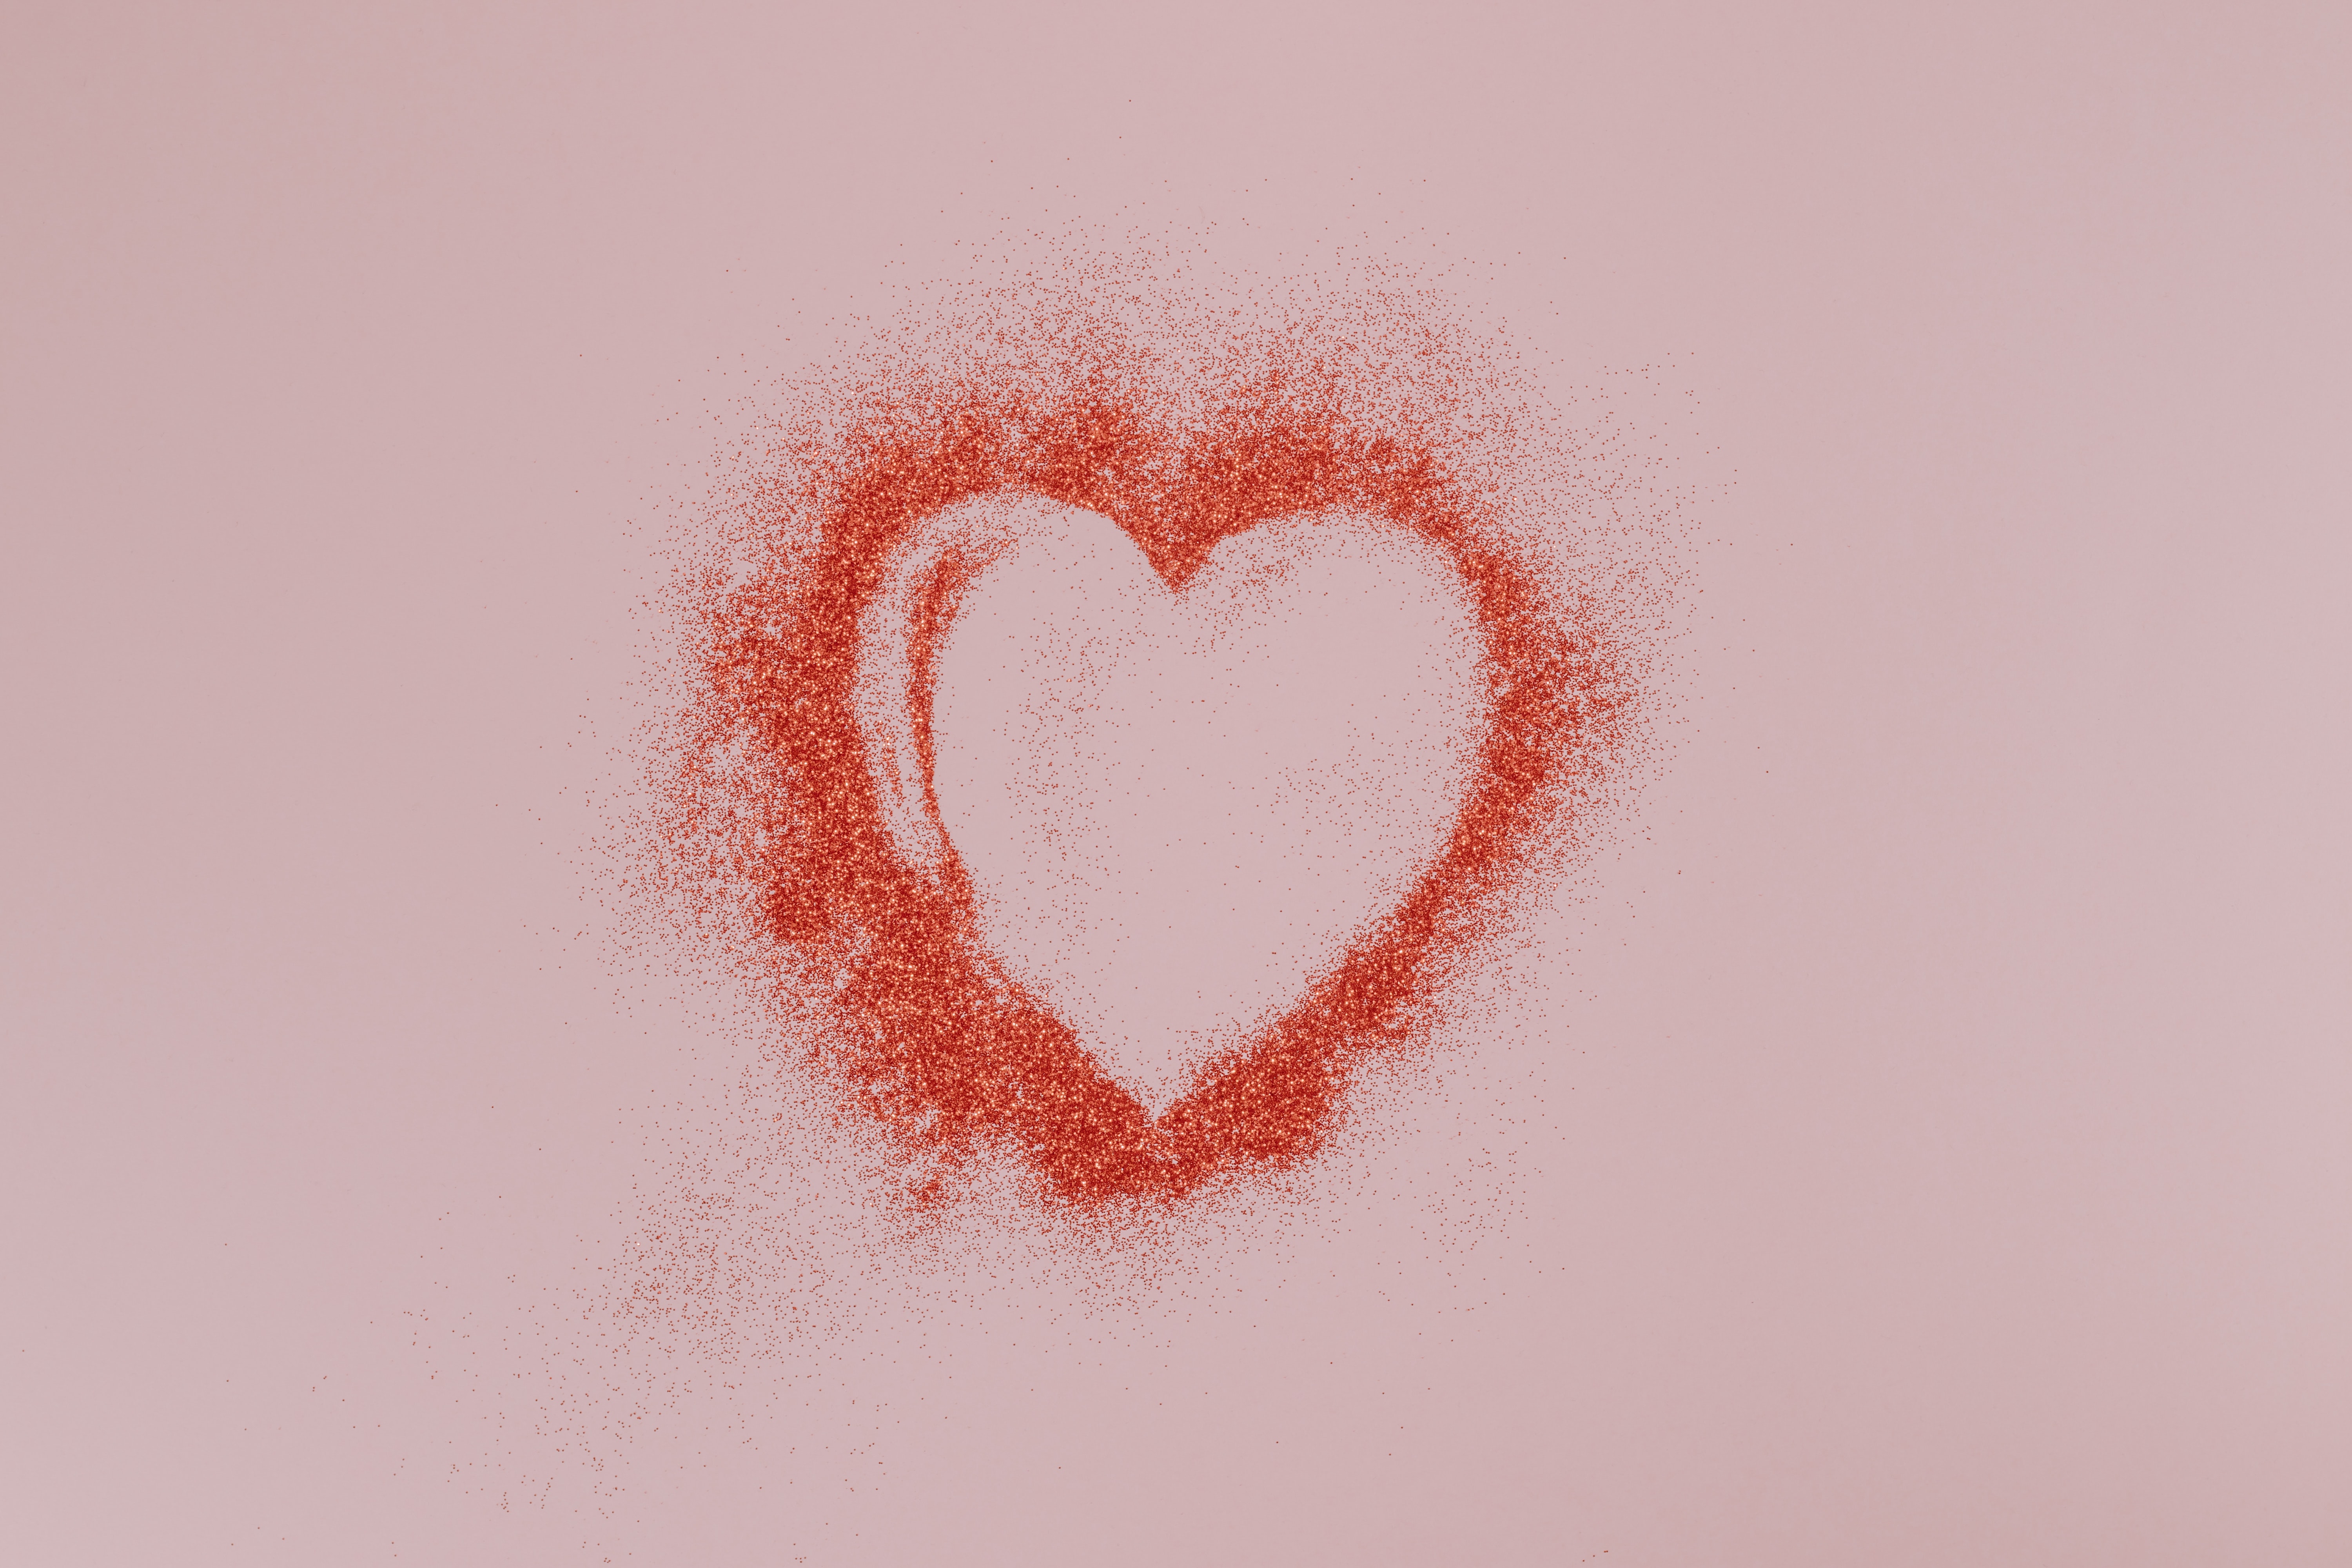 Glitter Heart Zoom Background. Share the Love This Valentine's Day With These 50 Zoom Background Image